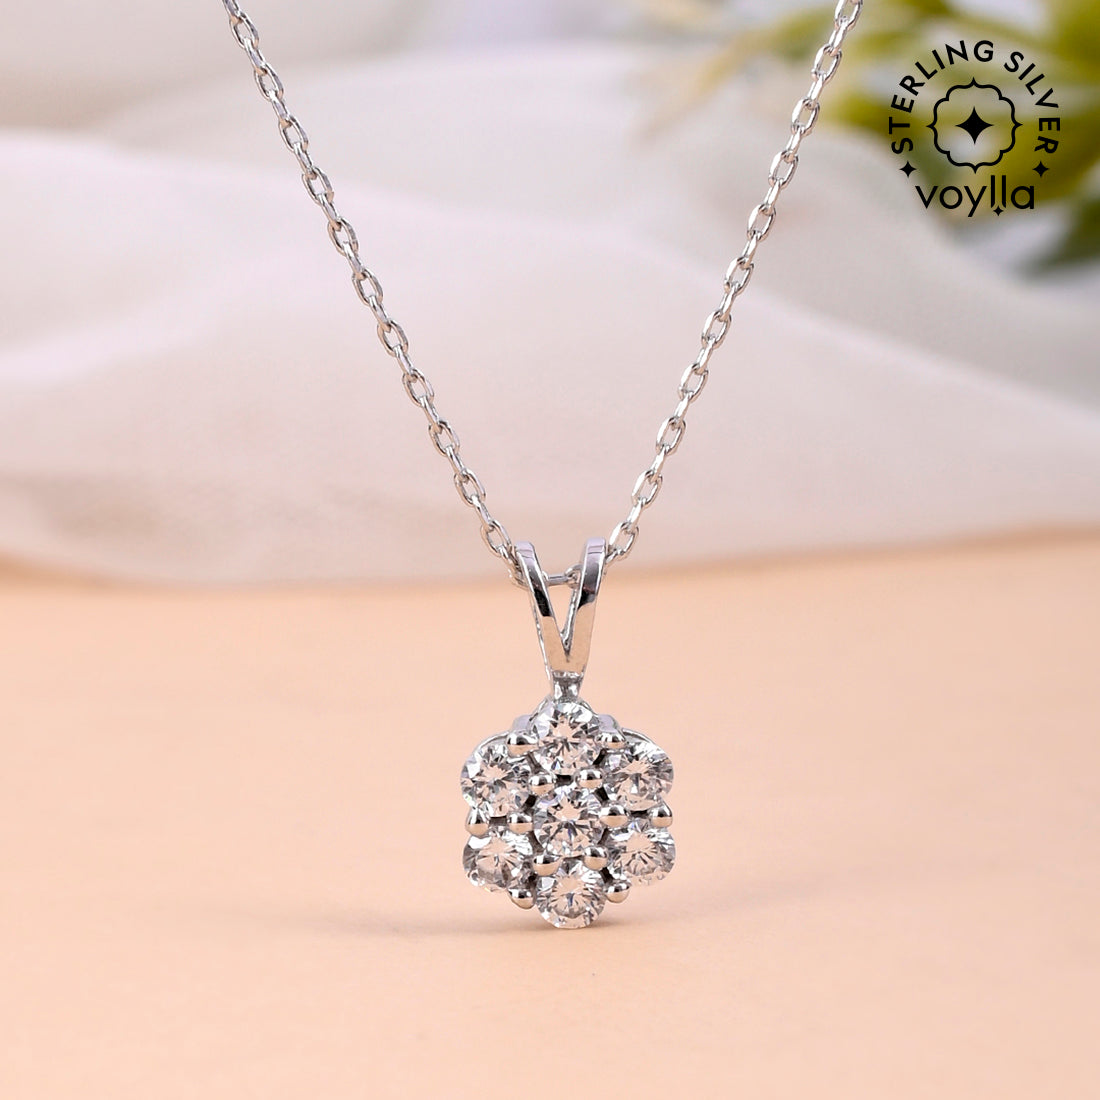 FINE SILVER PLATED CUBIC ZIRCONIA V SHAPE NECKLACE, 18 + 2